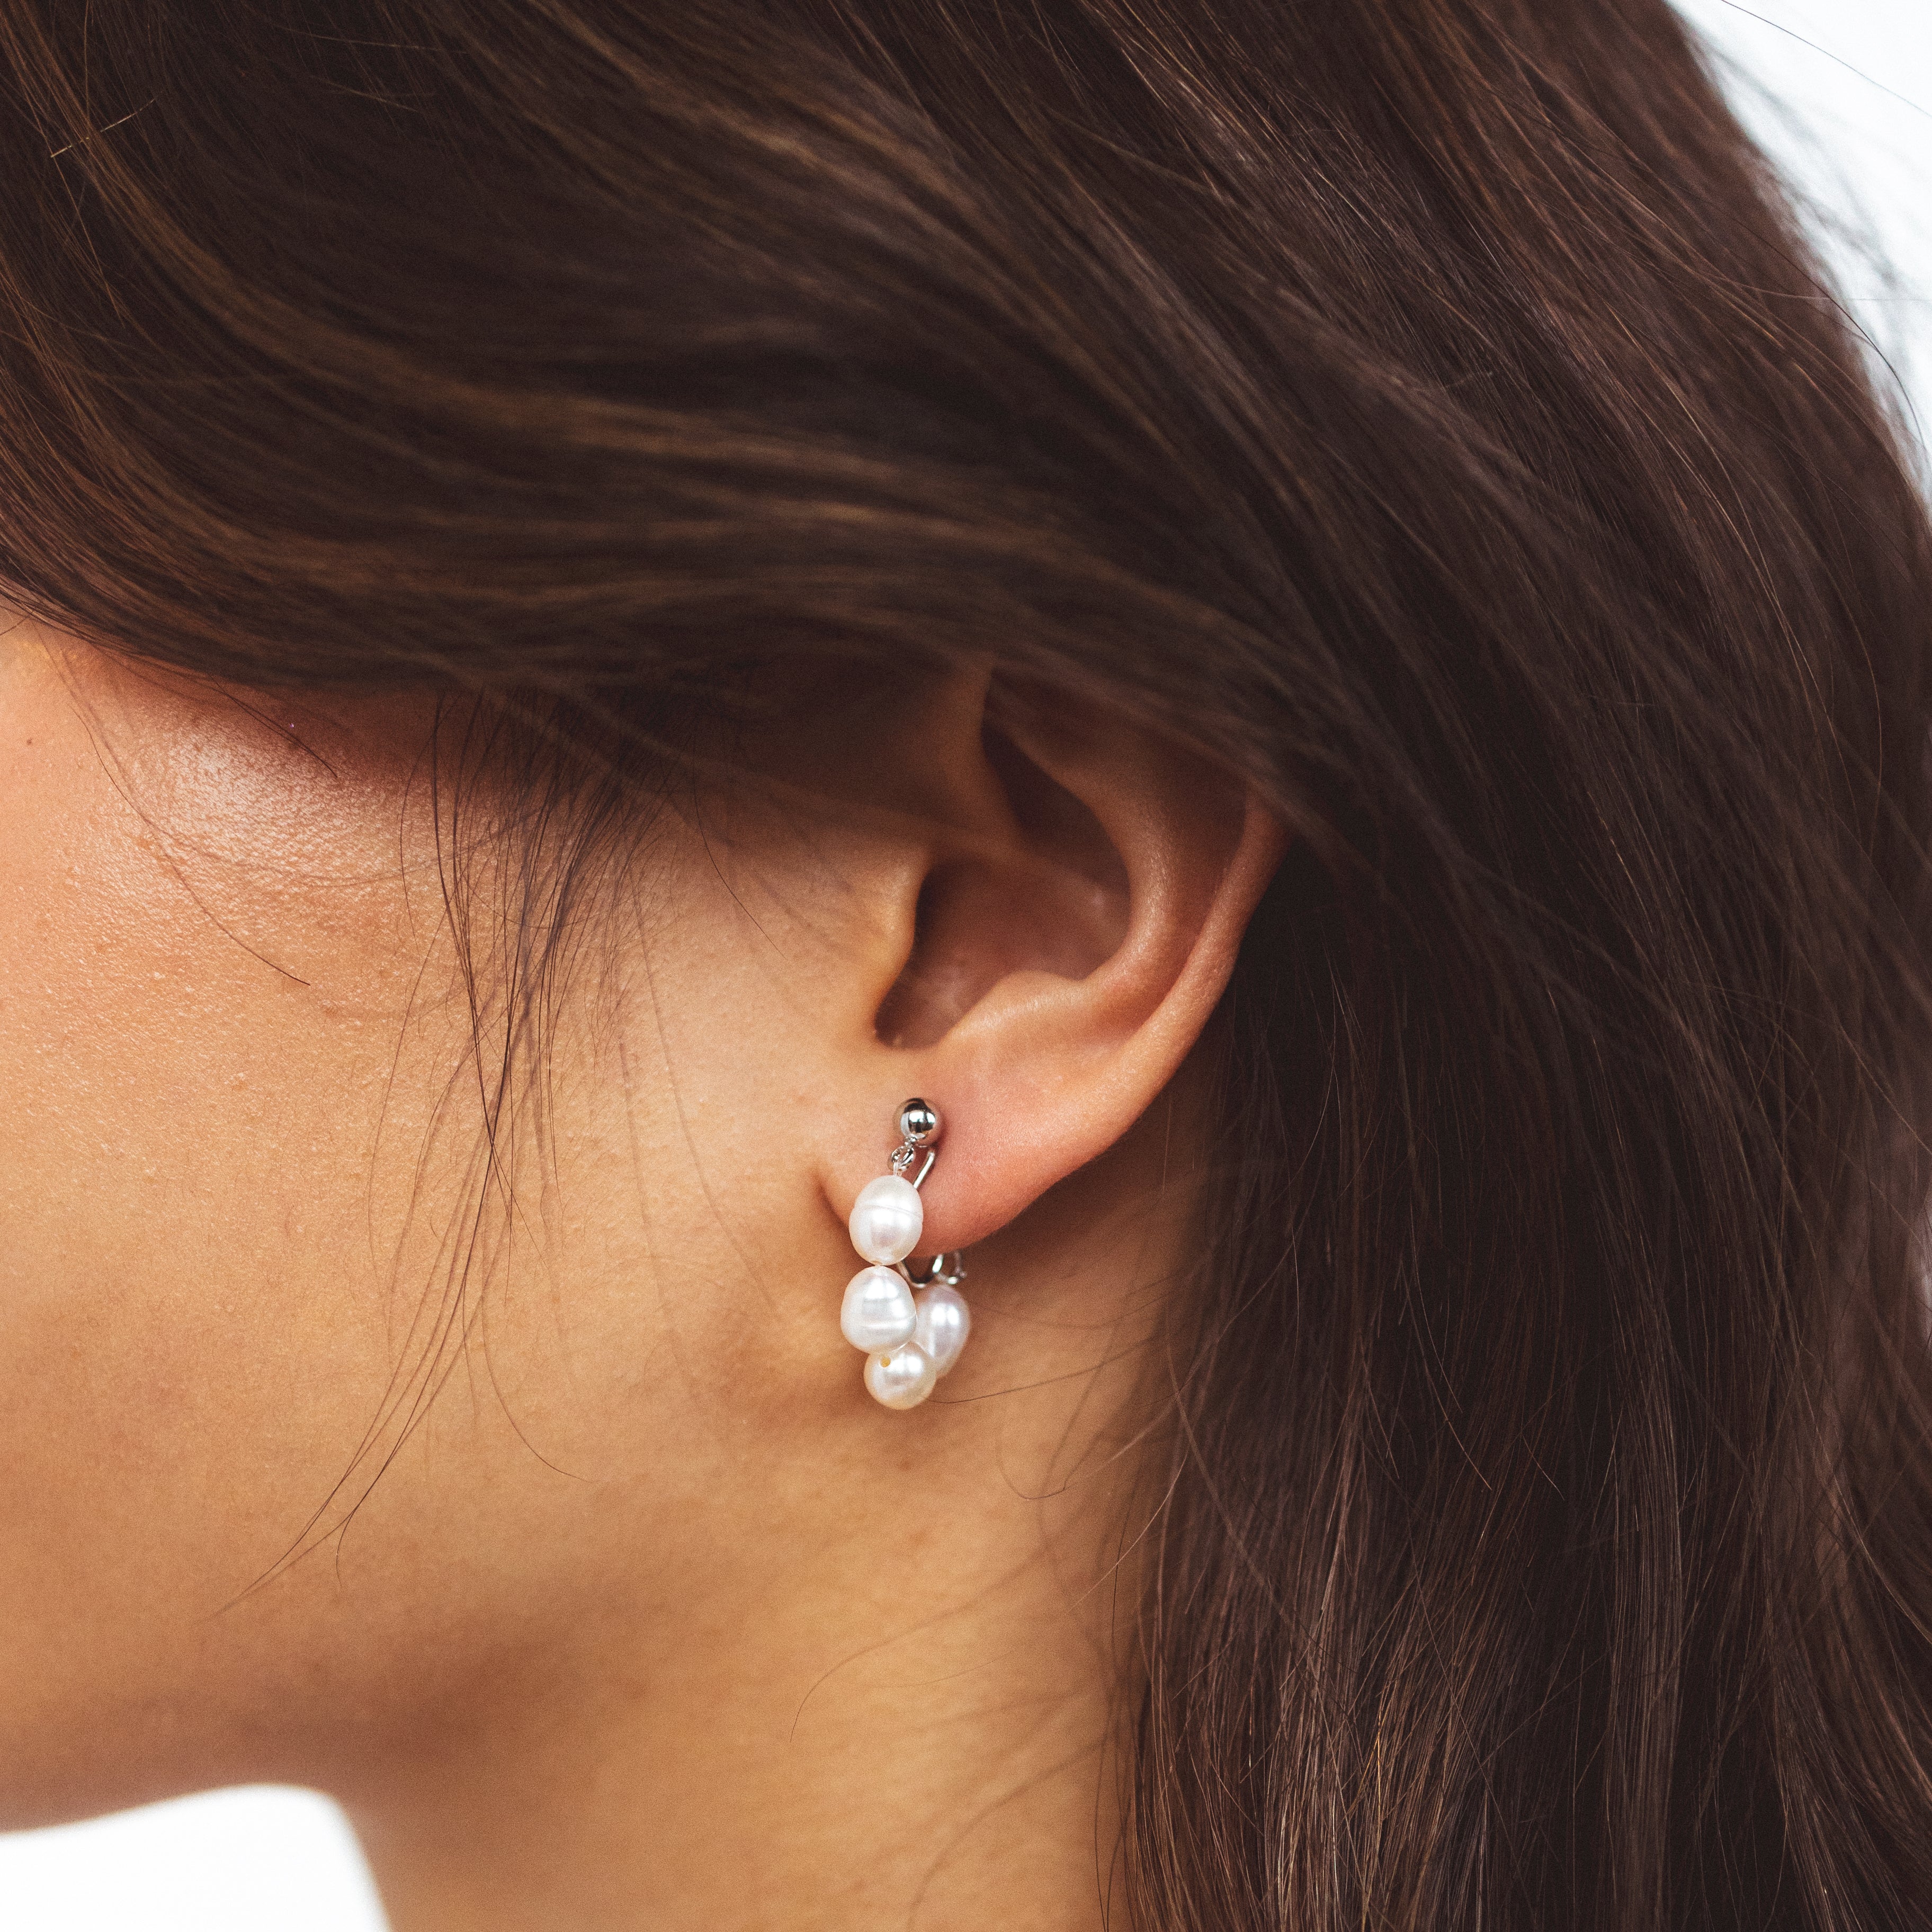 A model wearing the Blair Clip On Earrings. Our earrings offer a secure 24-hour hold and adjustable fit for all ear types, ideal for sensitive or stretched ears. Elevate your everyday ensemble with a touch of sophistication.